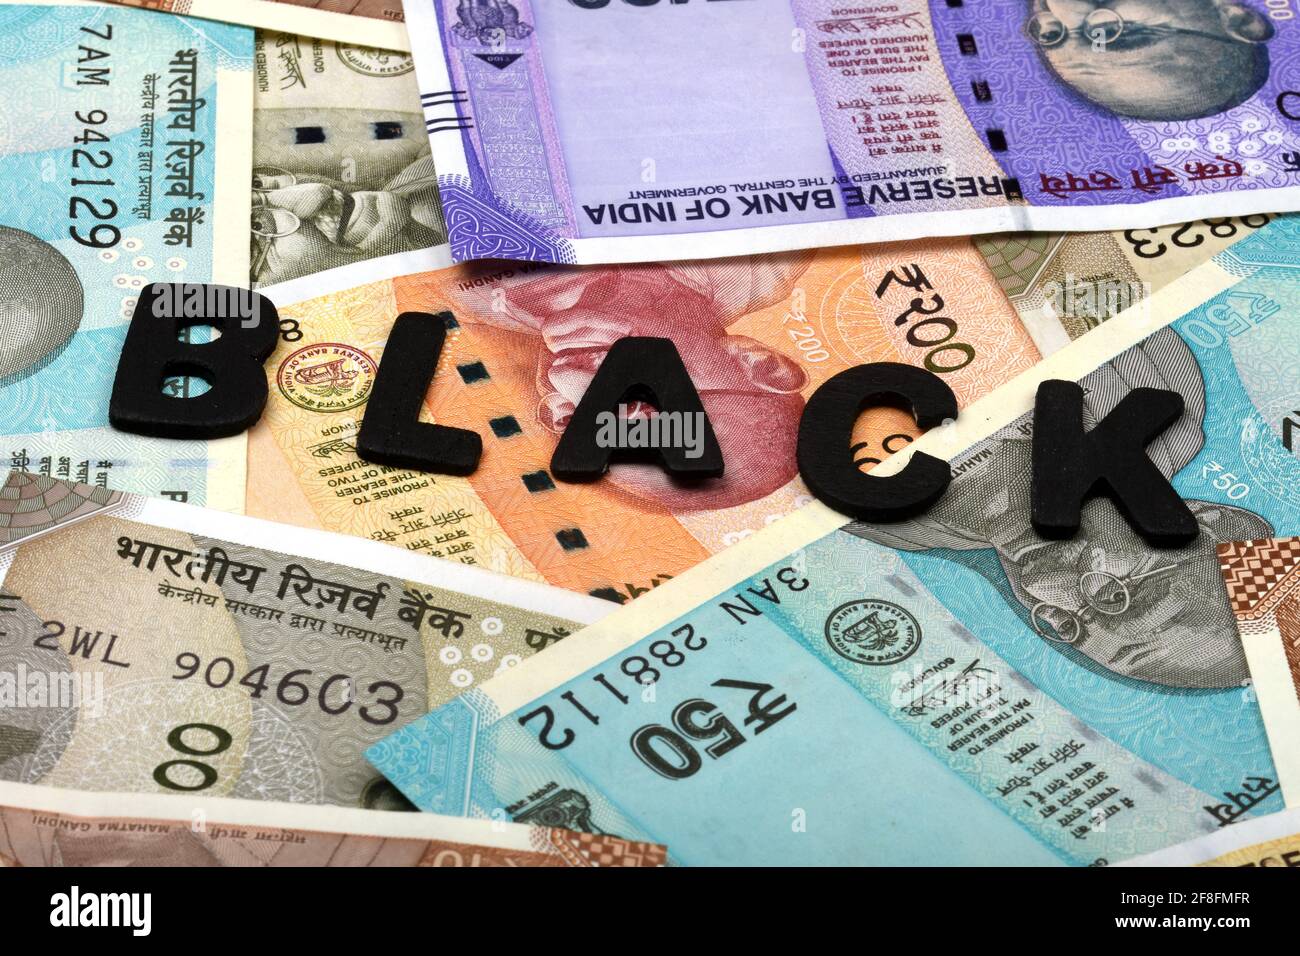 Black money concept, black alphabet on money background, Indian Currency, Rupee, Indian Rupee, Indian Money, Business, finance, investment, Stock Photo